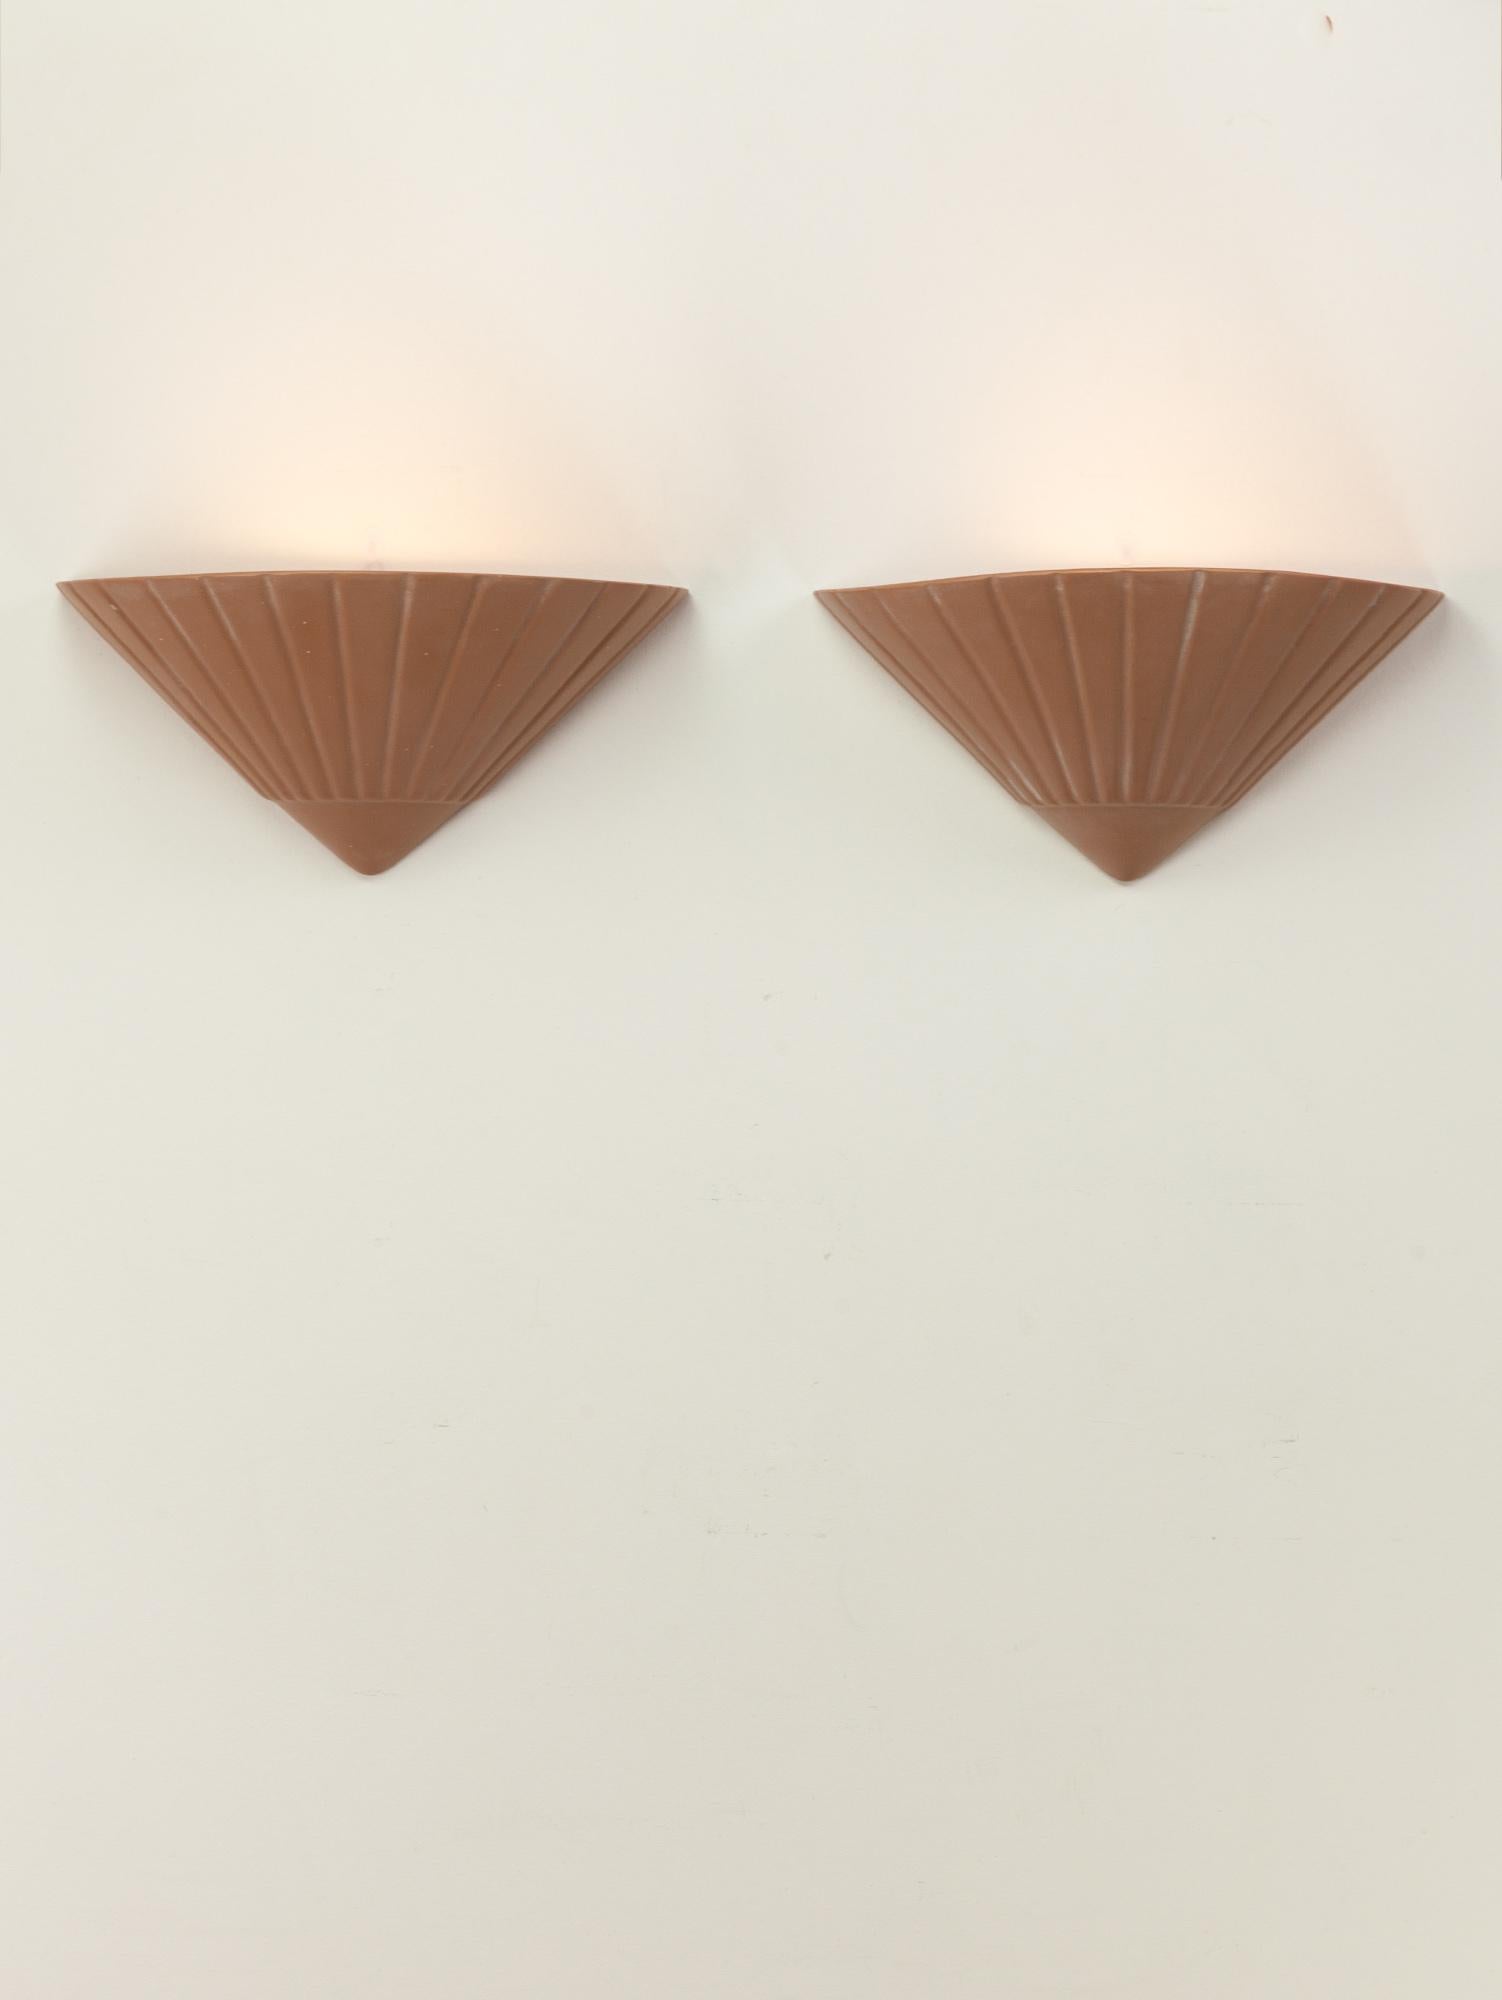 A pair of painted French plaster wall lights in a pinkish terracotta colour. The conical shape has a patterned surface.  Made in France. 1970s.

Great vintage condition with some signs of wear. Newly wired. Sourced from France.

Height 15.5 cm  5.9